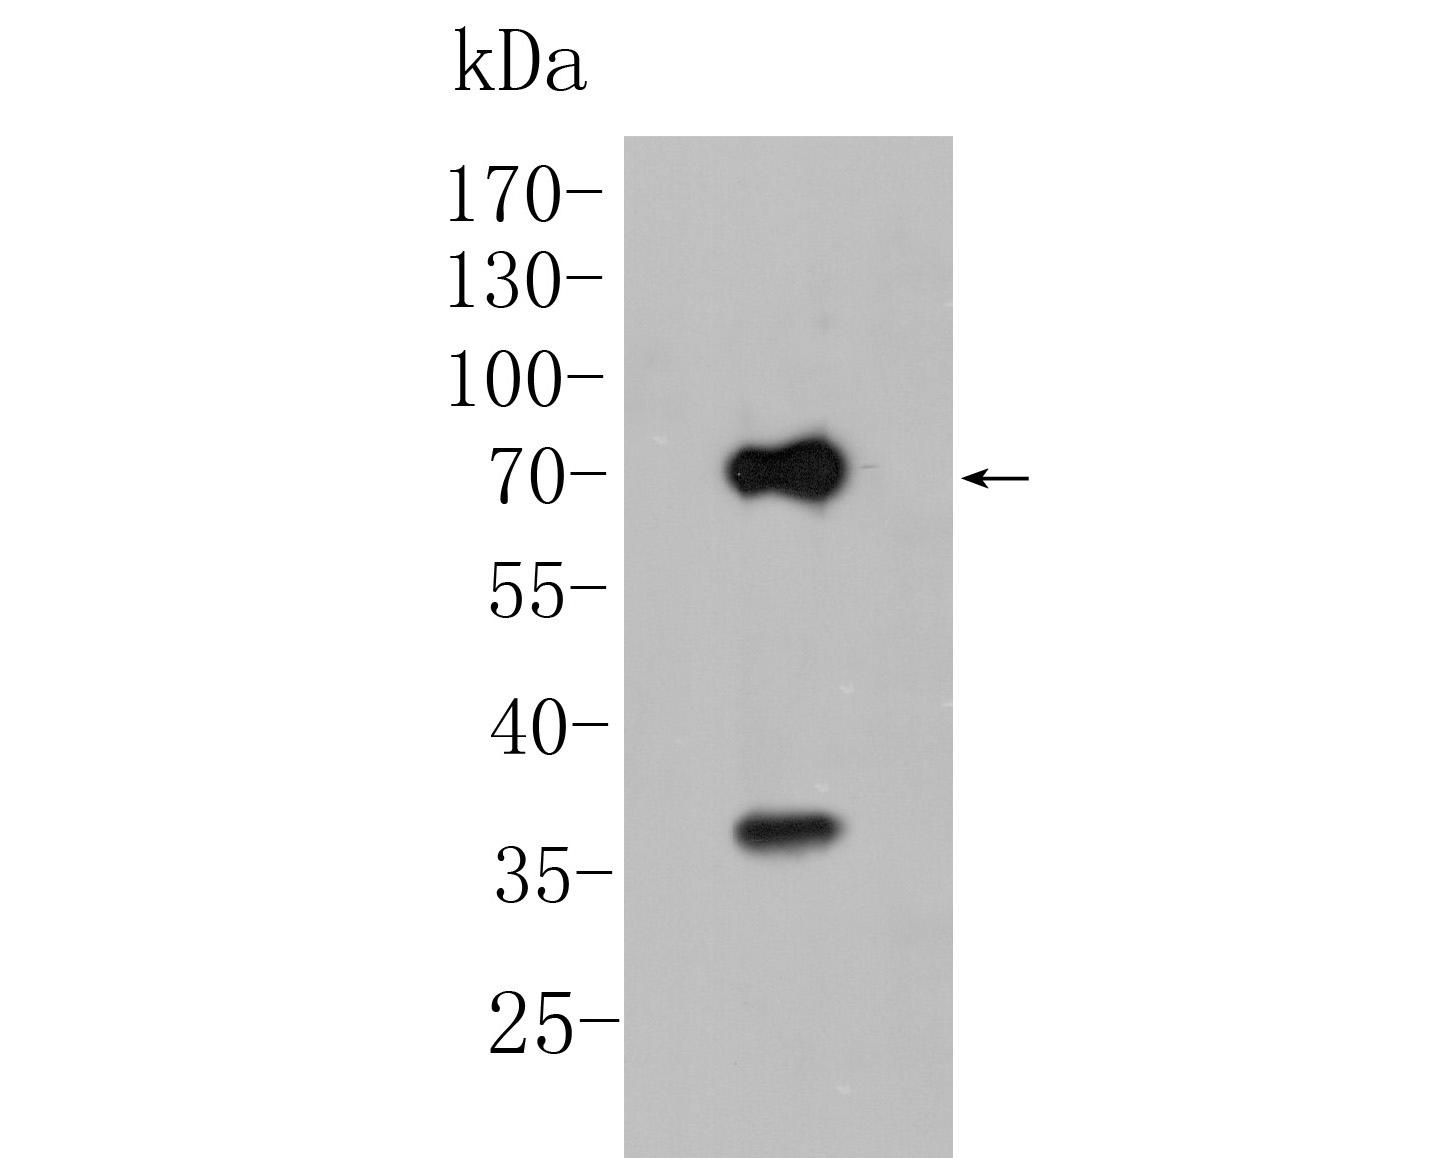 Western blot analysis of KCNN2 on rat brain tissue lysate. Proteins were transferred to a PVDF membrane and blocked with 5% BSA in PBS for 1 hour at room temperature. The primary antibody (ER1902-41, 1/500) was used in 5% BSA at room temperature for 2 hours. Goat Anti-Rabbit IgG - HRP Secondary Antibody (HA1001) at 1:5,000 dilution was used for 1 hour at room temperature.